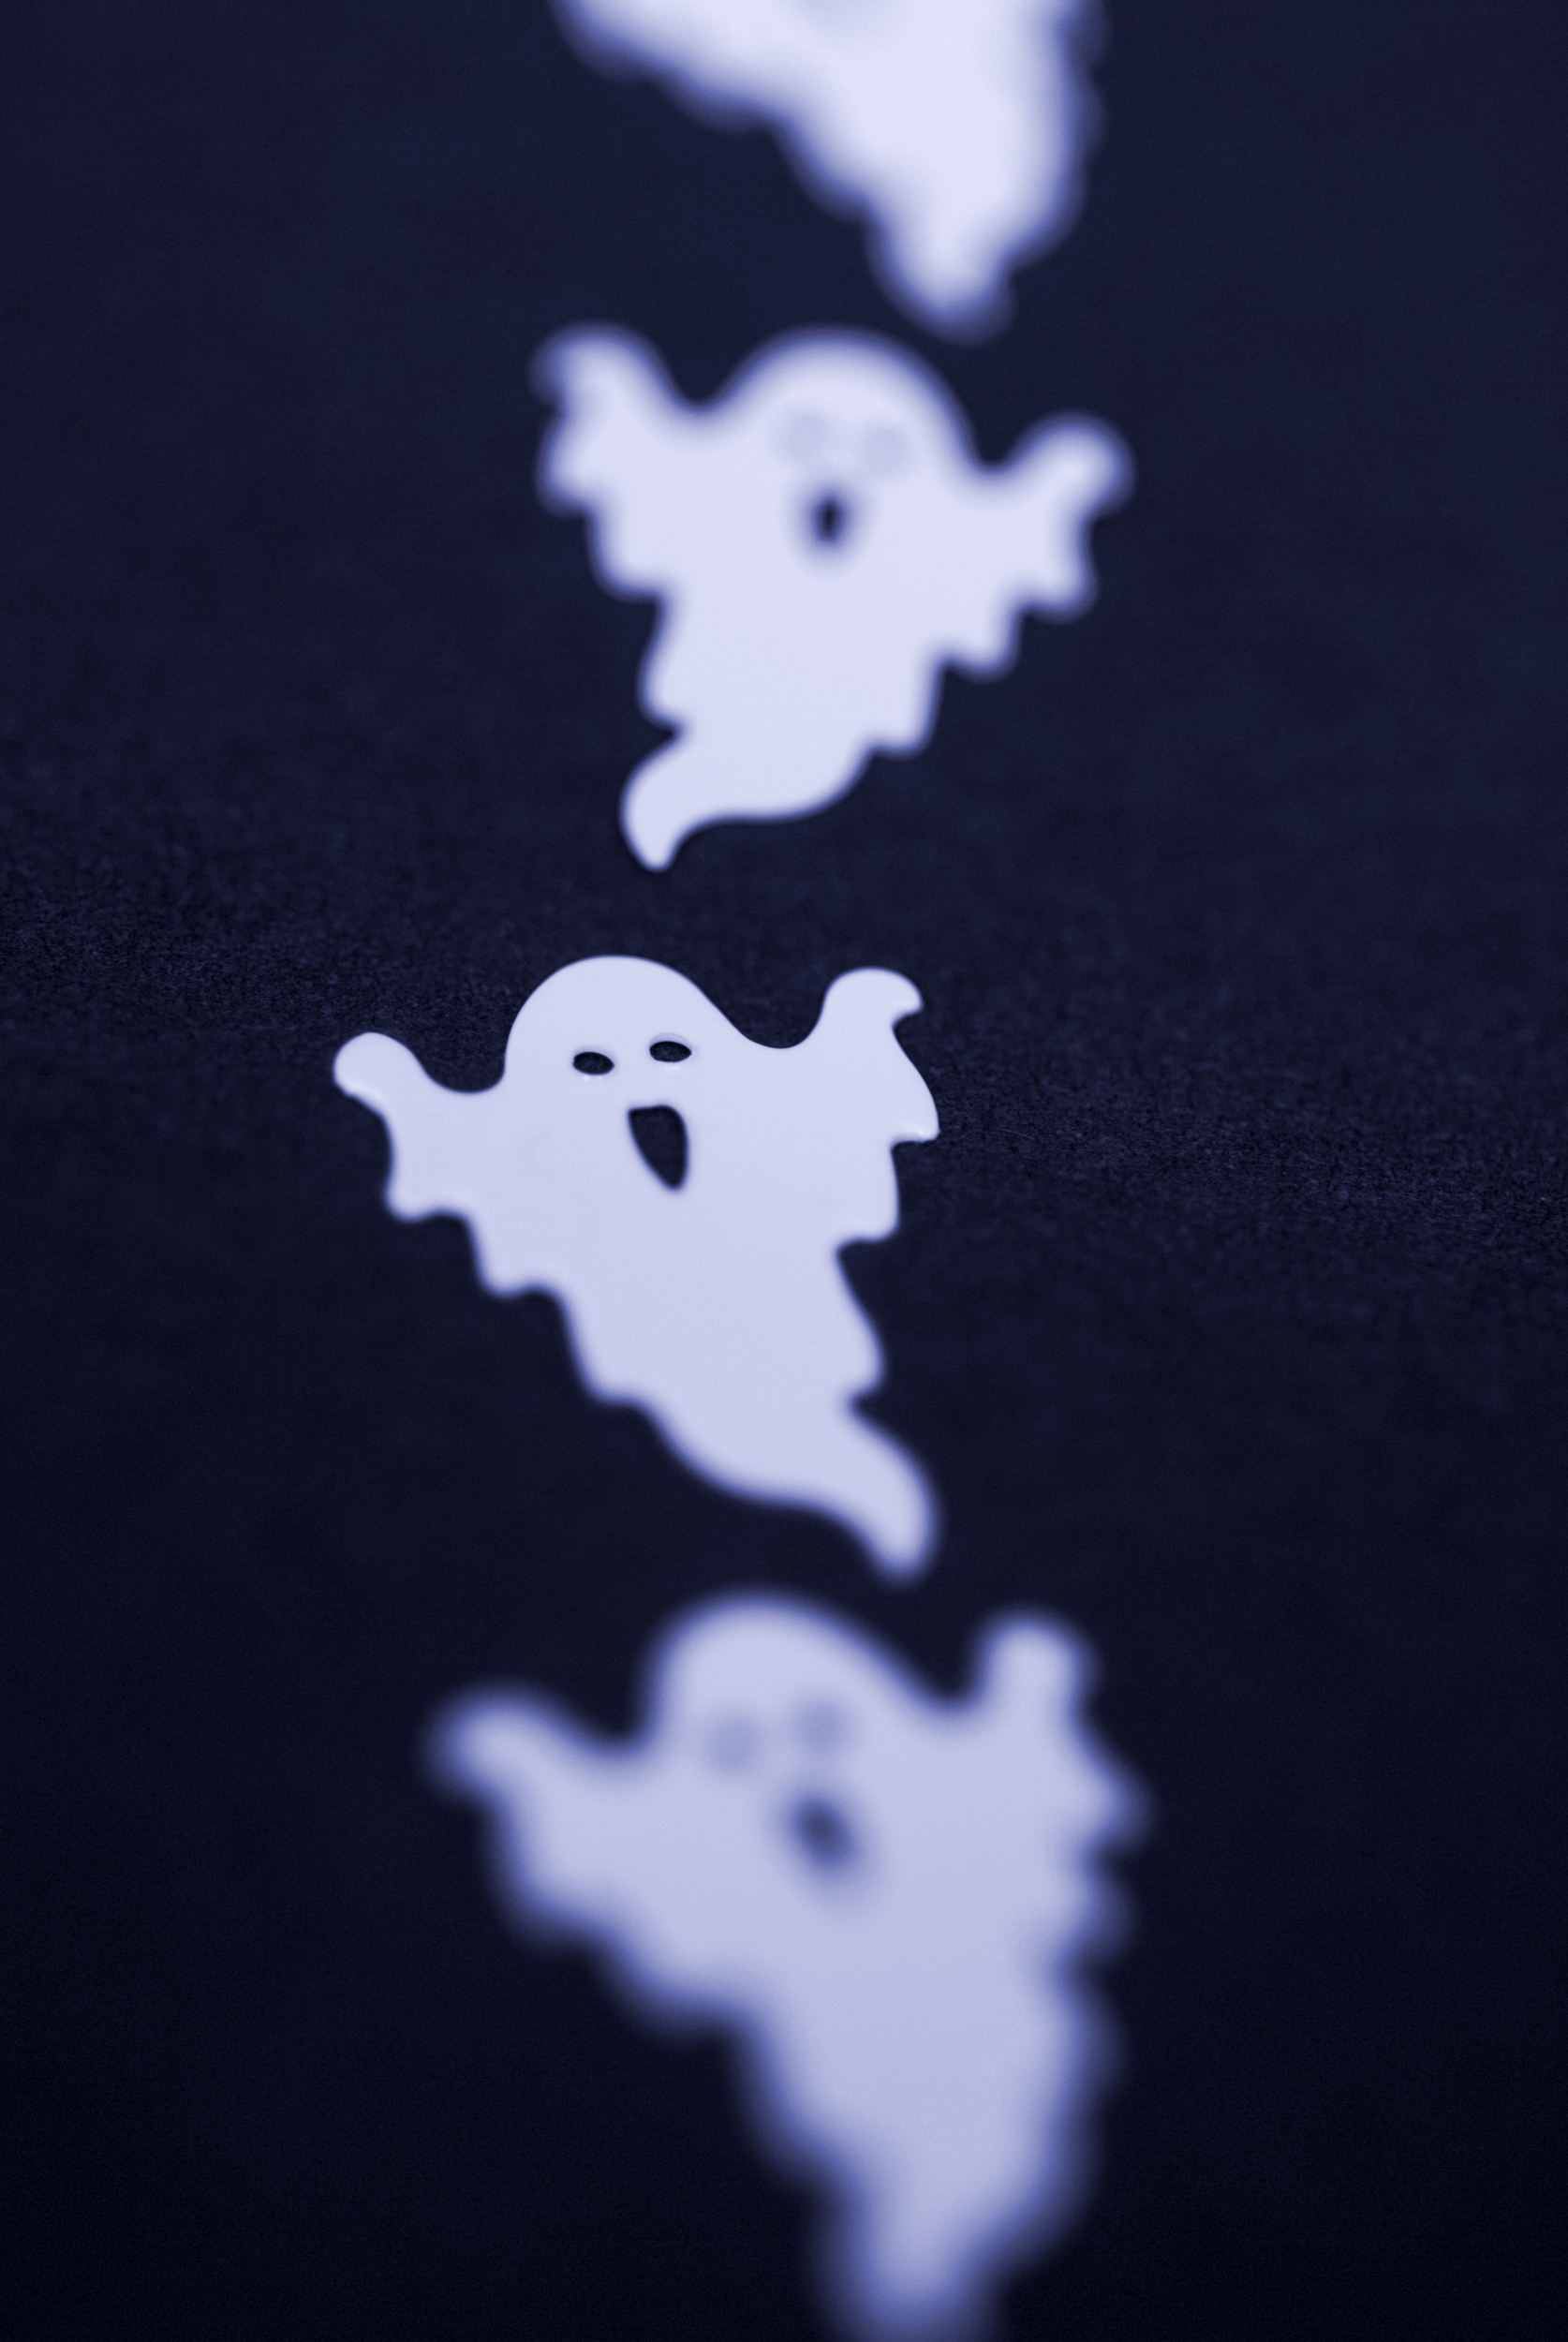 Free Stock Photo 1440-line of ghosts | freeimageslive